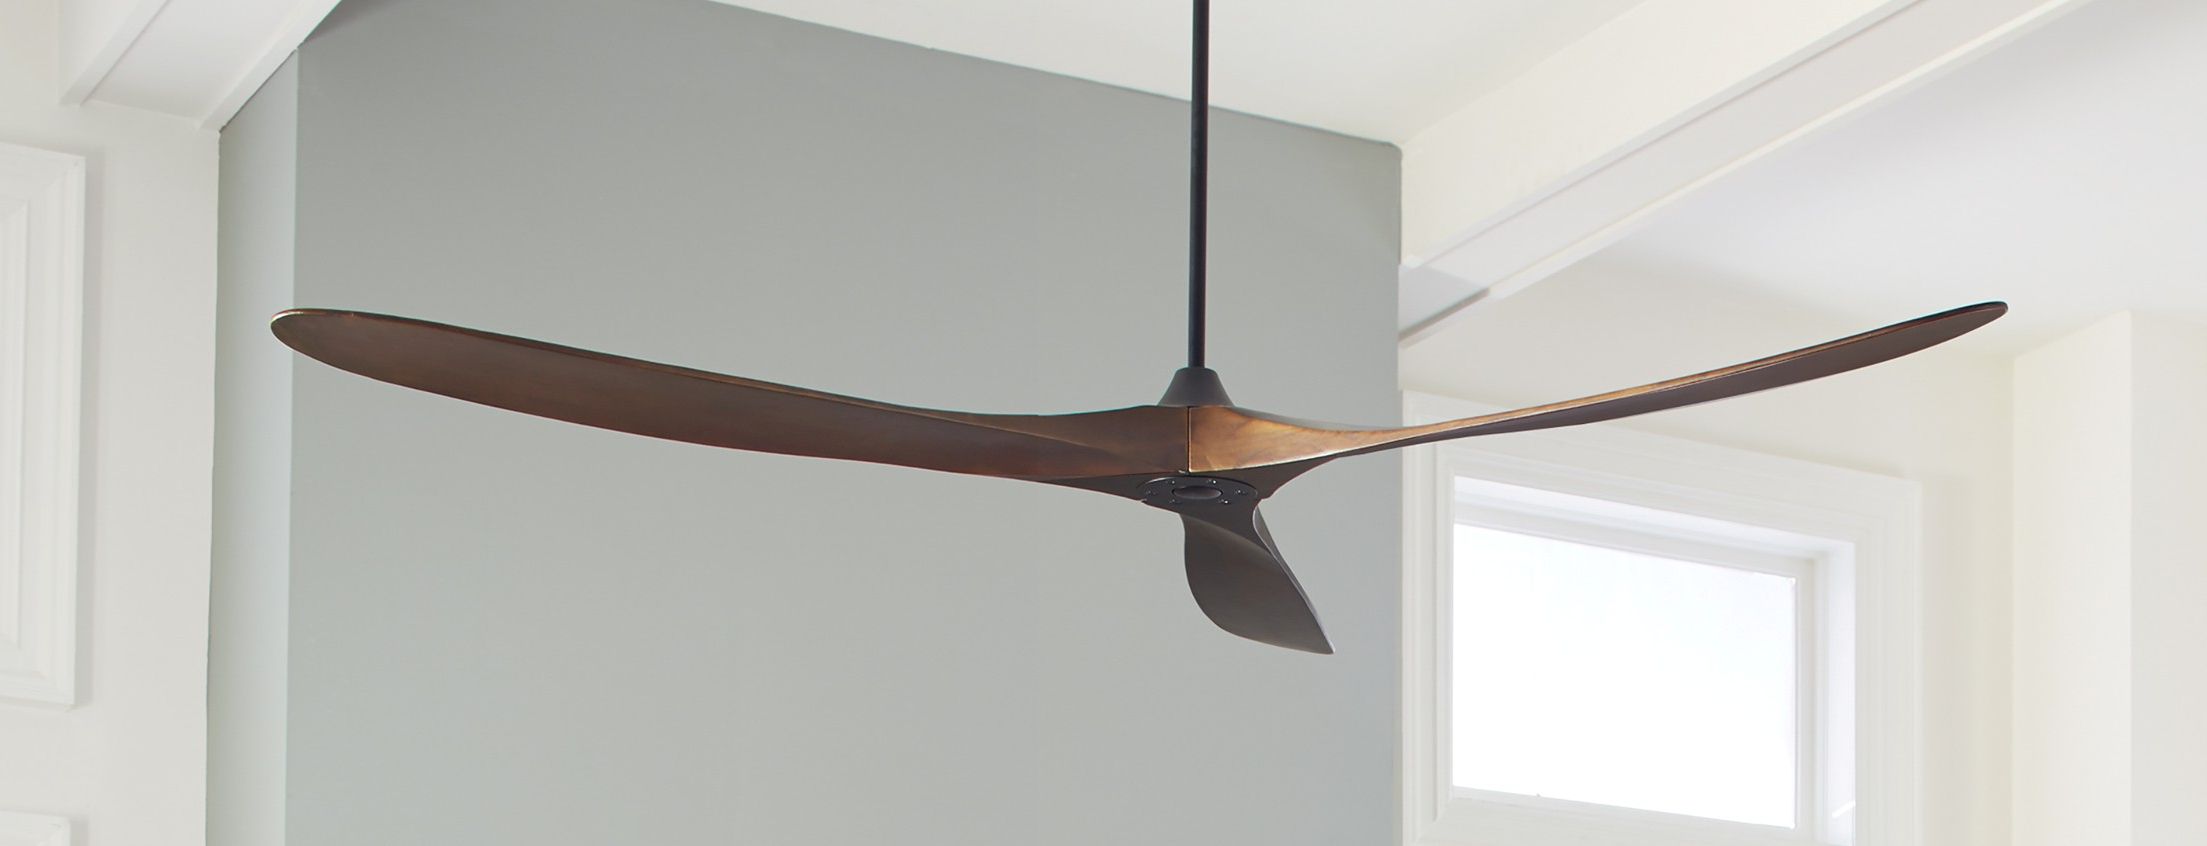 Napoli 5 Blade Led Ceiling Fans Within Popular Ceiling Fans – Fans – Lighting Fixtures (View 14 of 20)